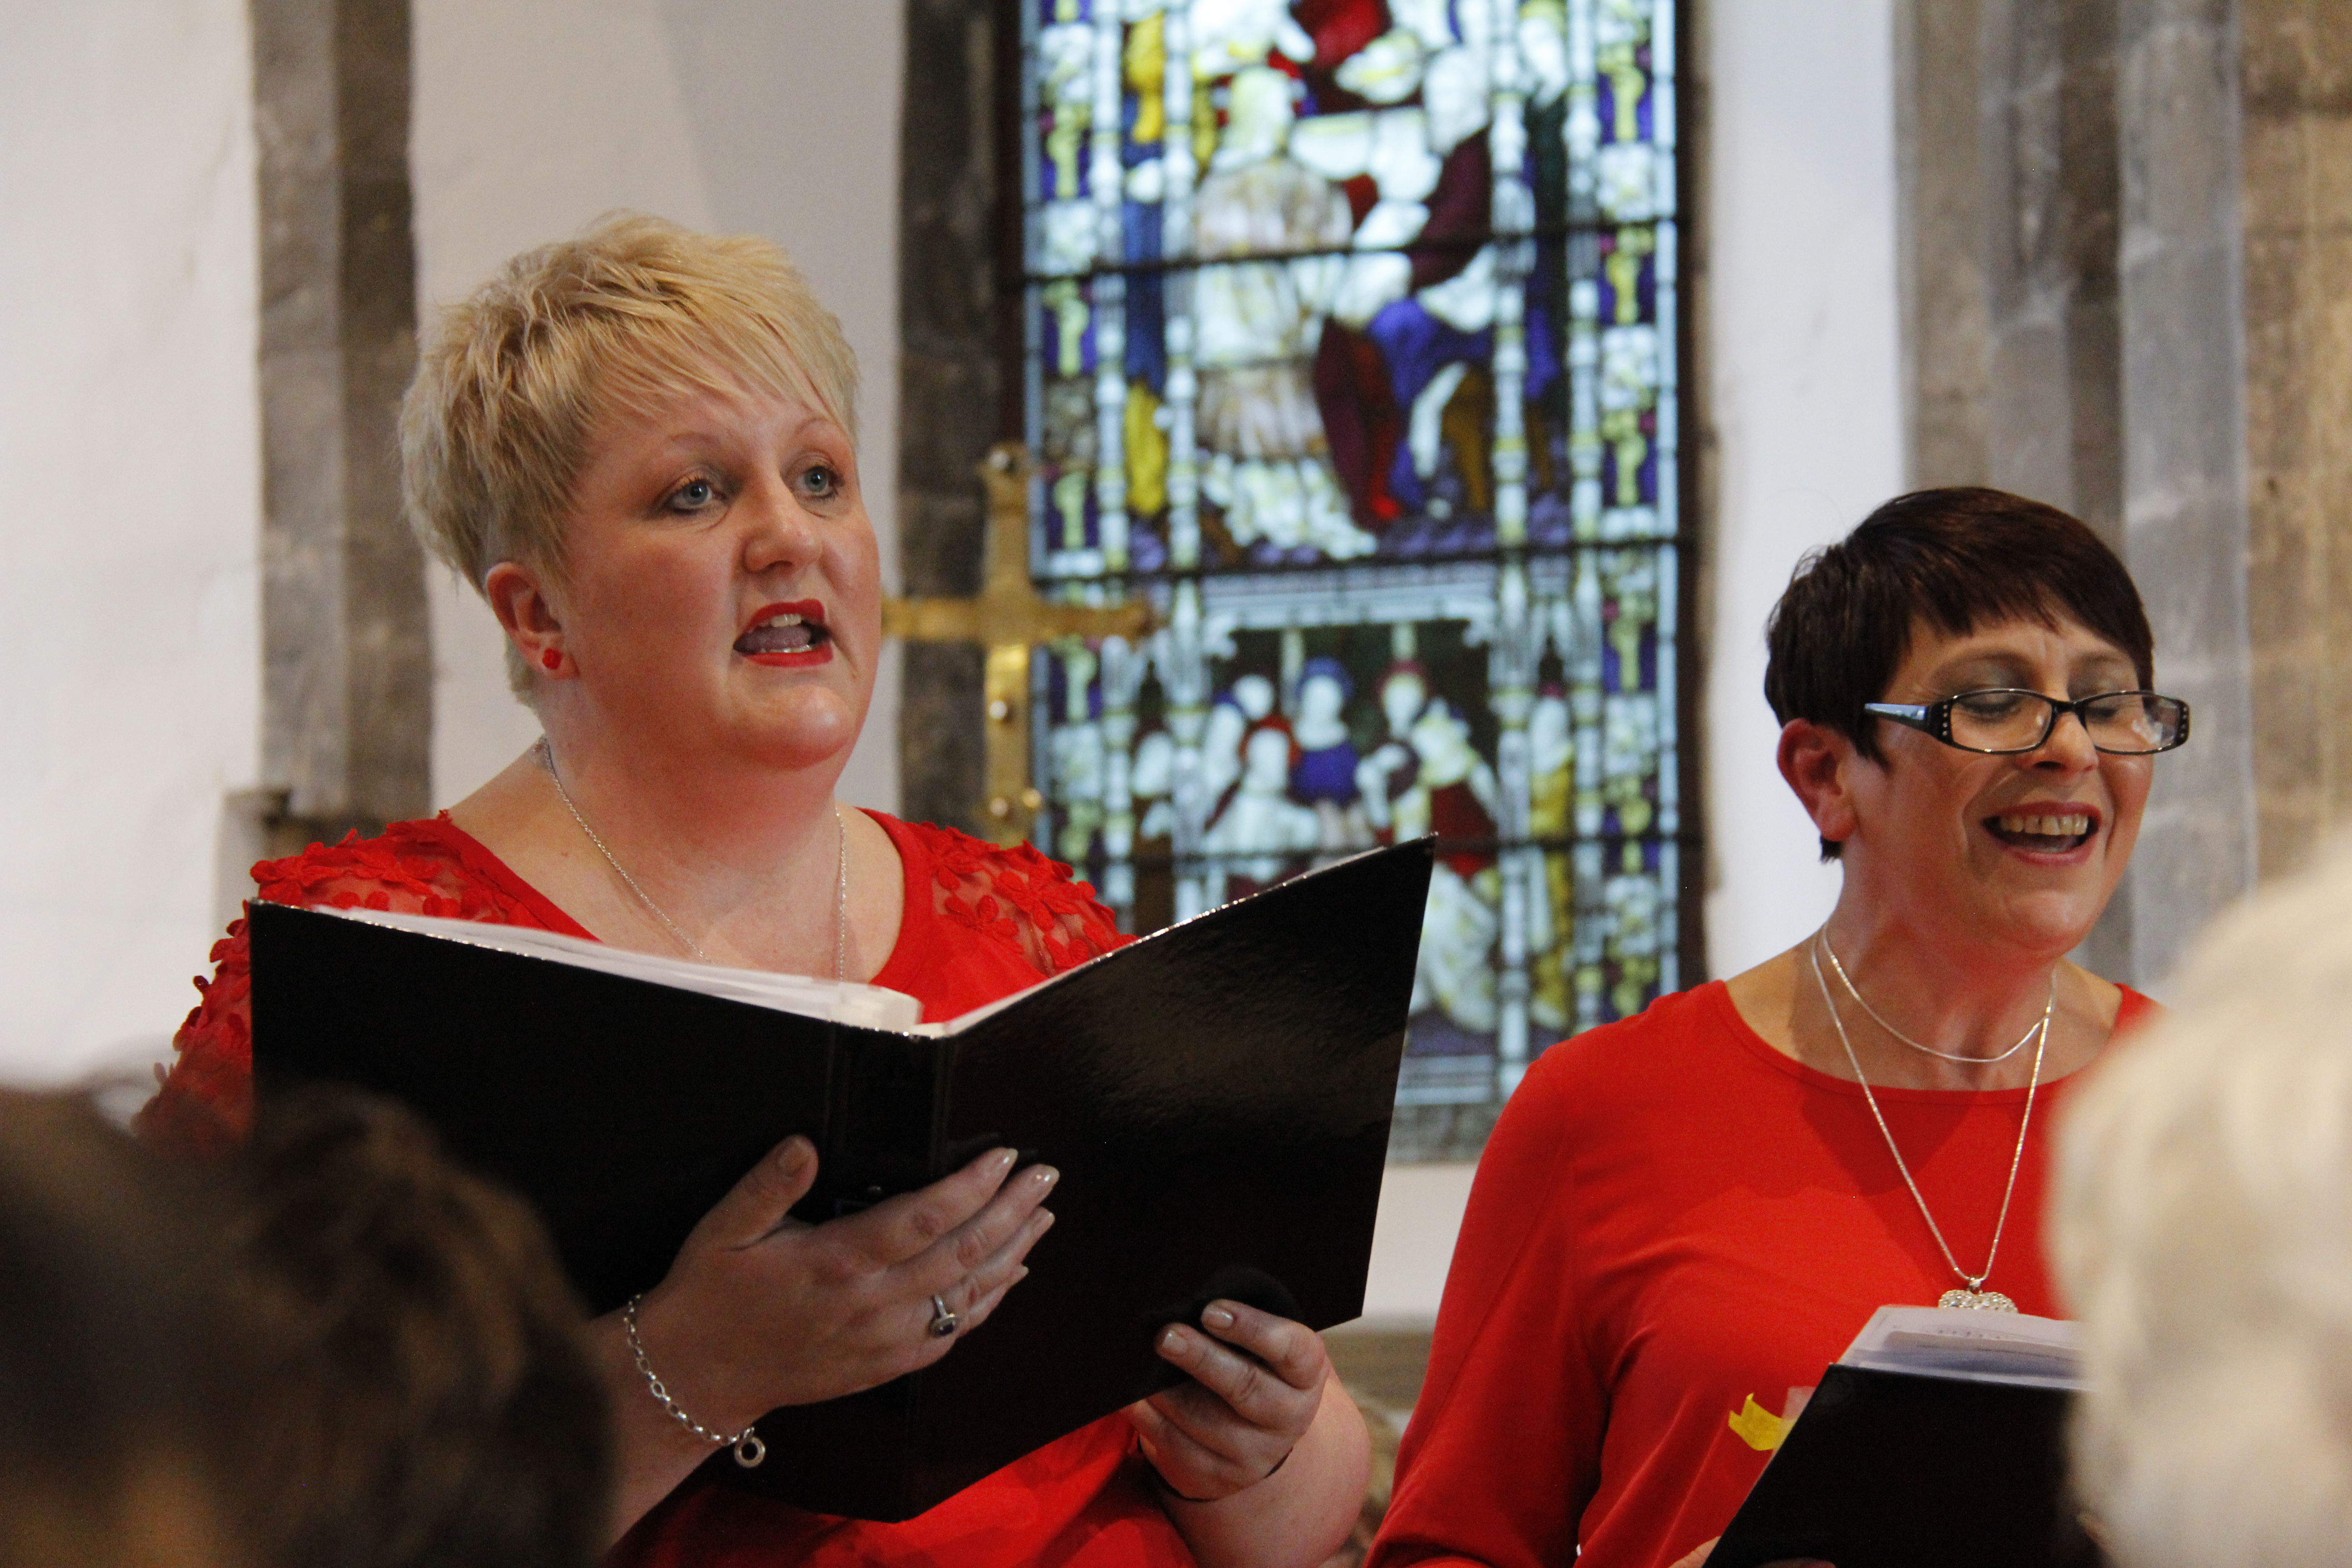 Two singers stand side by side singing from their music folders. The singer on the left is taller with short, blond hair and the singer on the right is shorter, with short brown hair and glasses. They're both wearing red tops and their expressions are joyful.